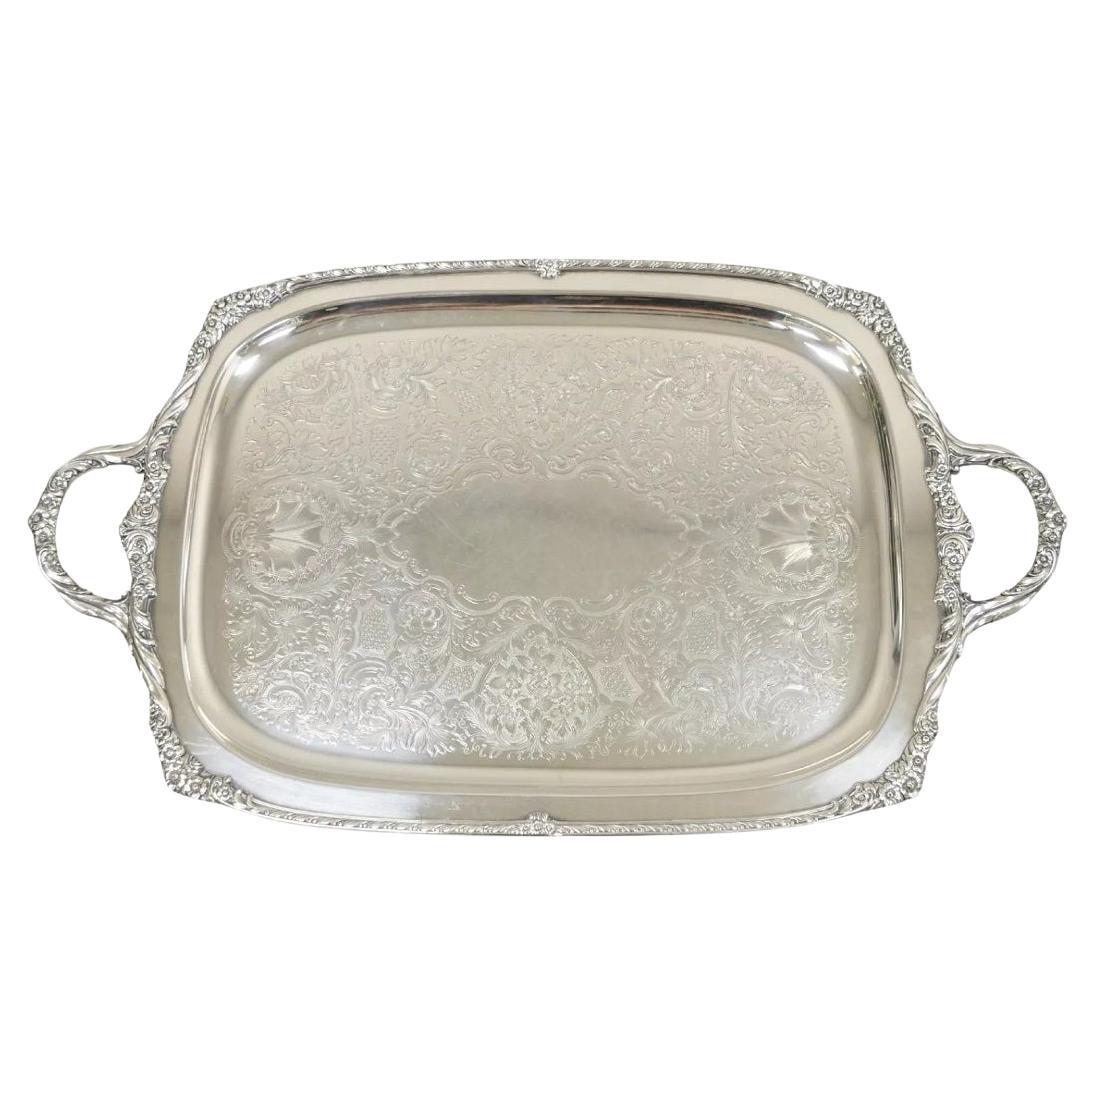 Rogers Bros. 1847 Heritage 9493 Large Silver Plated Serving Platter Tray